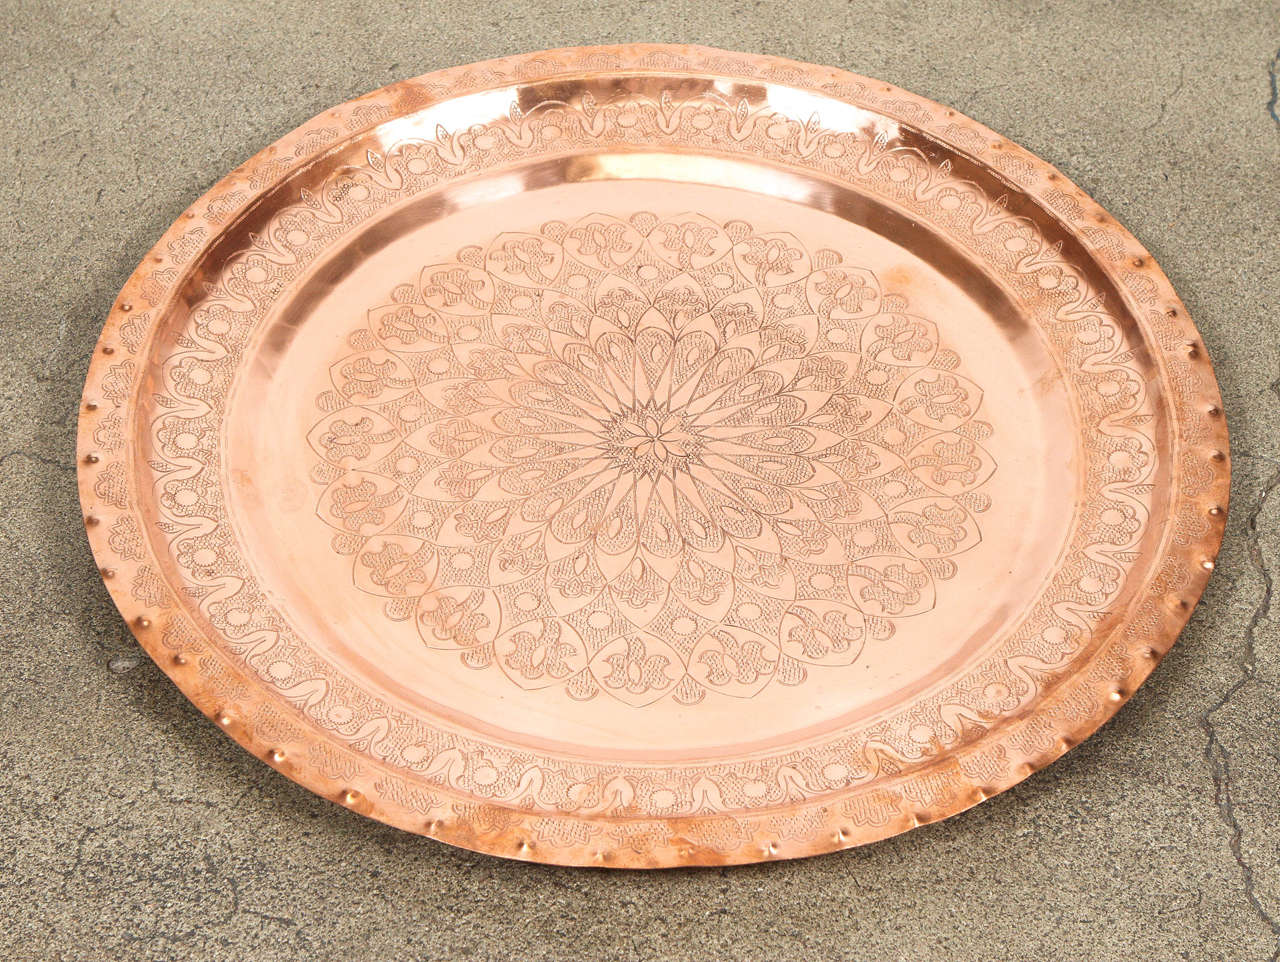 Large antique hand-hammered Moroccan copper tray platter.
Great Islamic art brass metal work, hand-chiseled with intricate fine Moorish floral and geometrical Moorish designs.
Polished and cleaned ready to use indoor or outdoor .